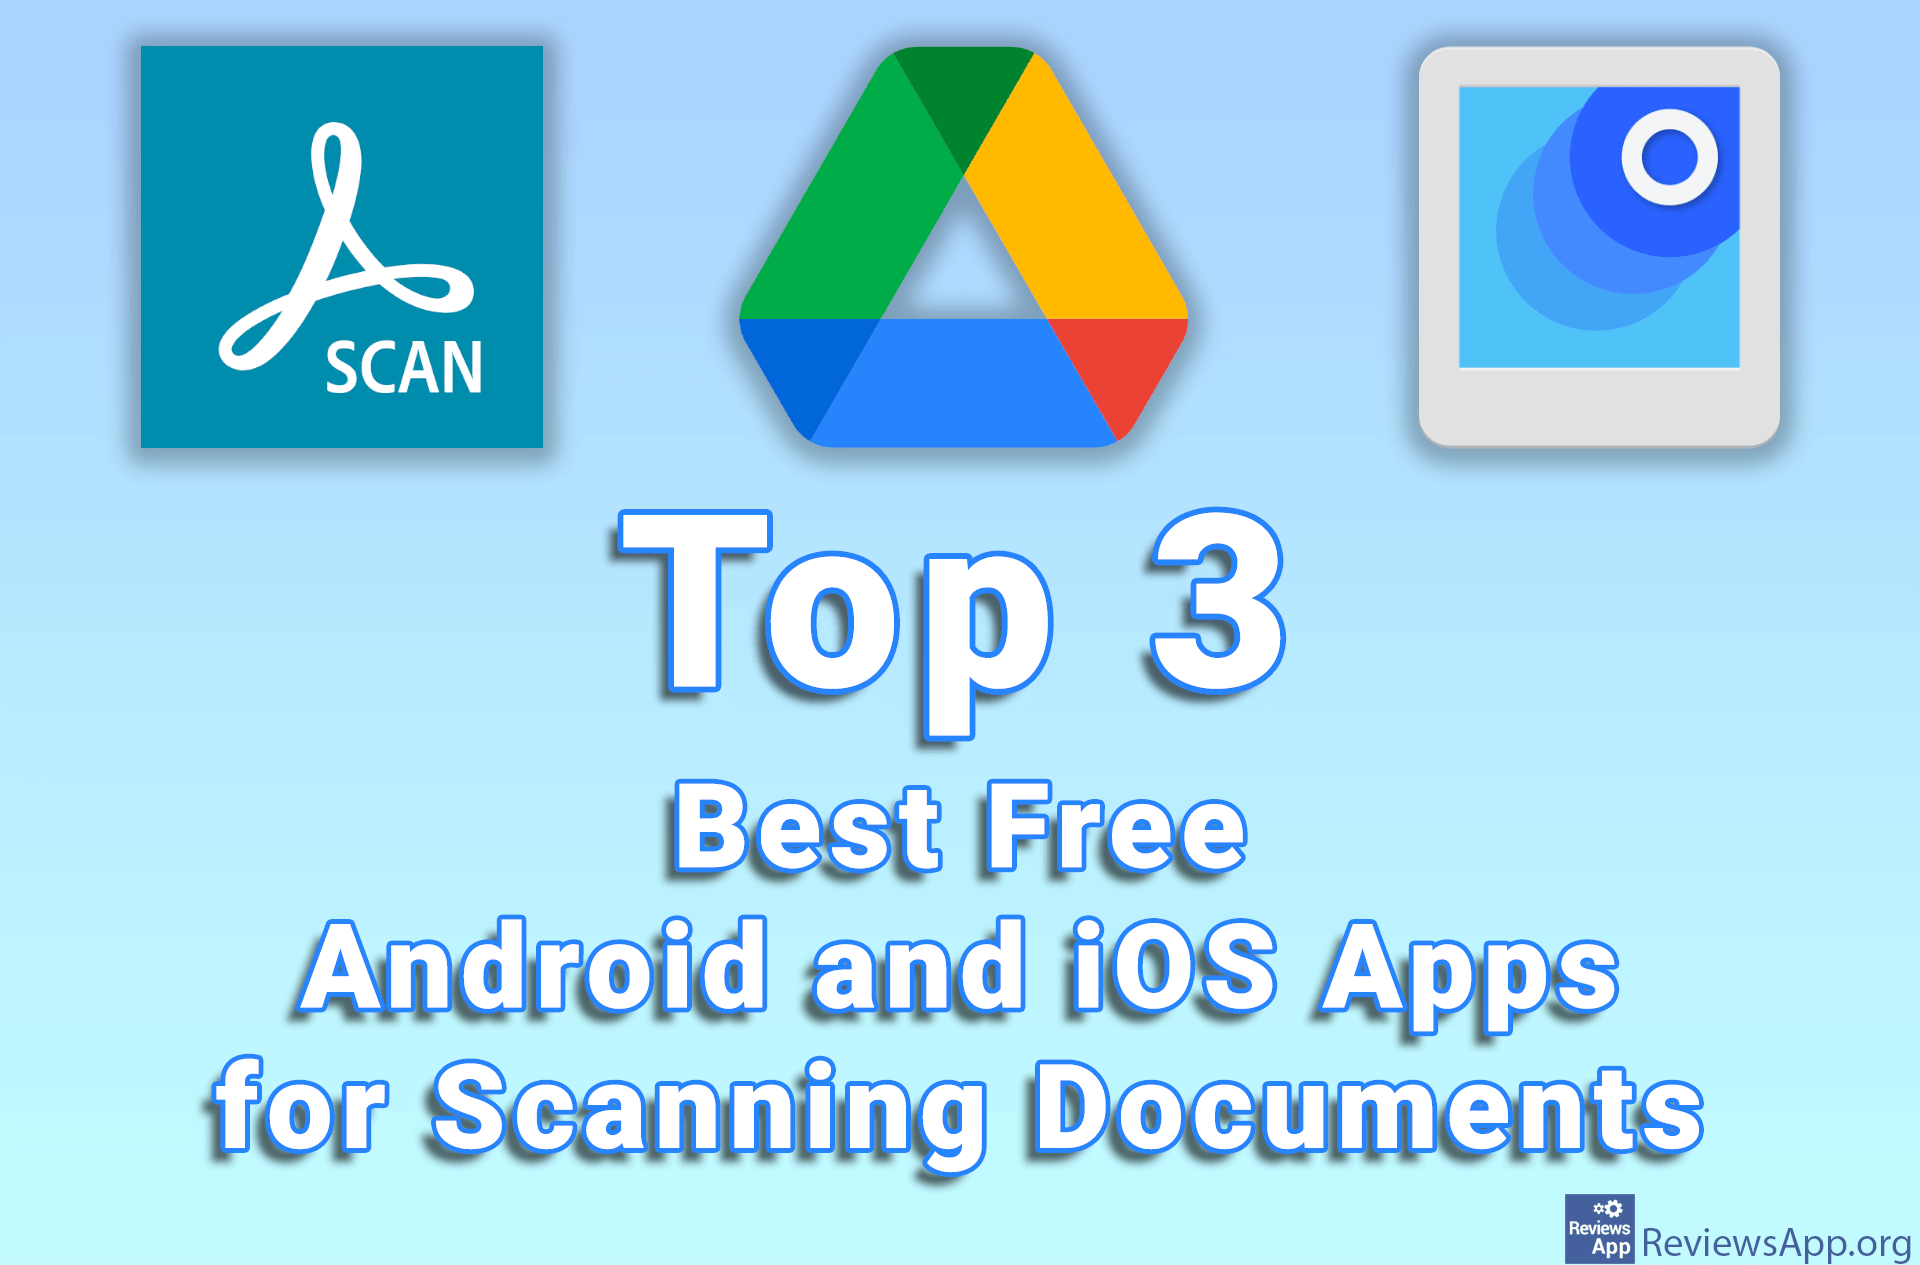 Top 3 Best Free Android and iOS Apps for Scanning Documents